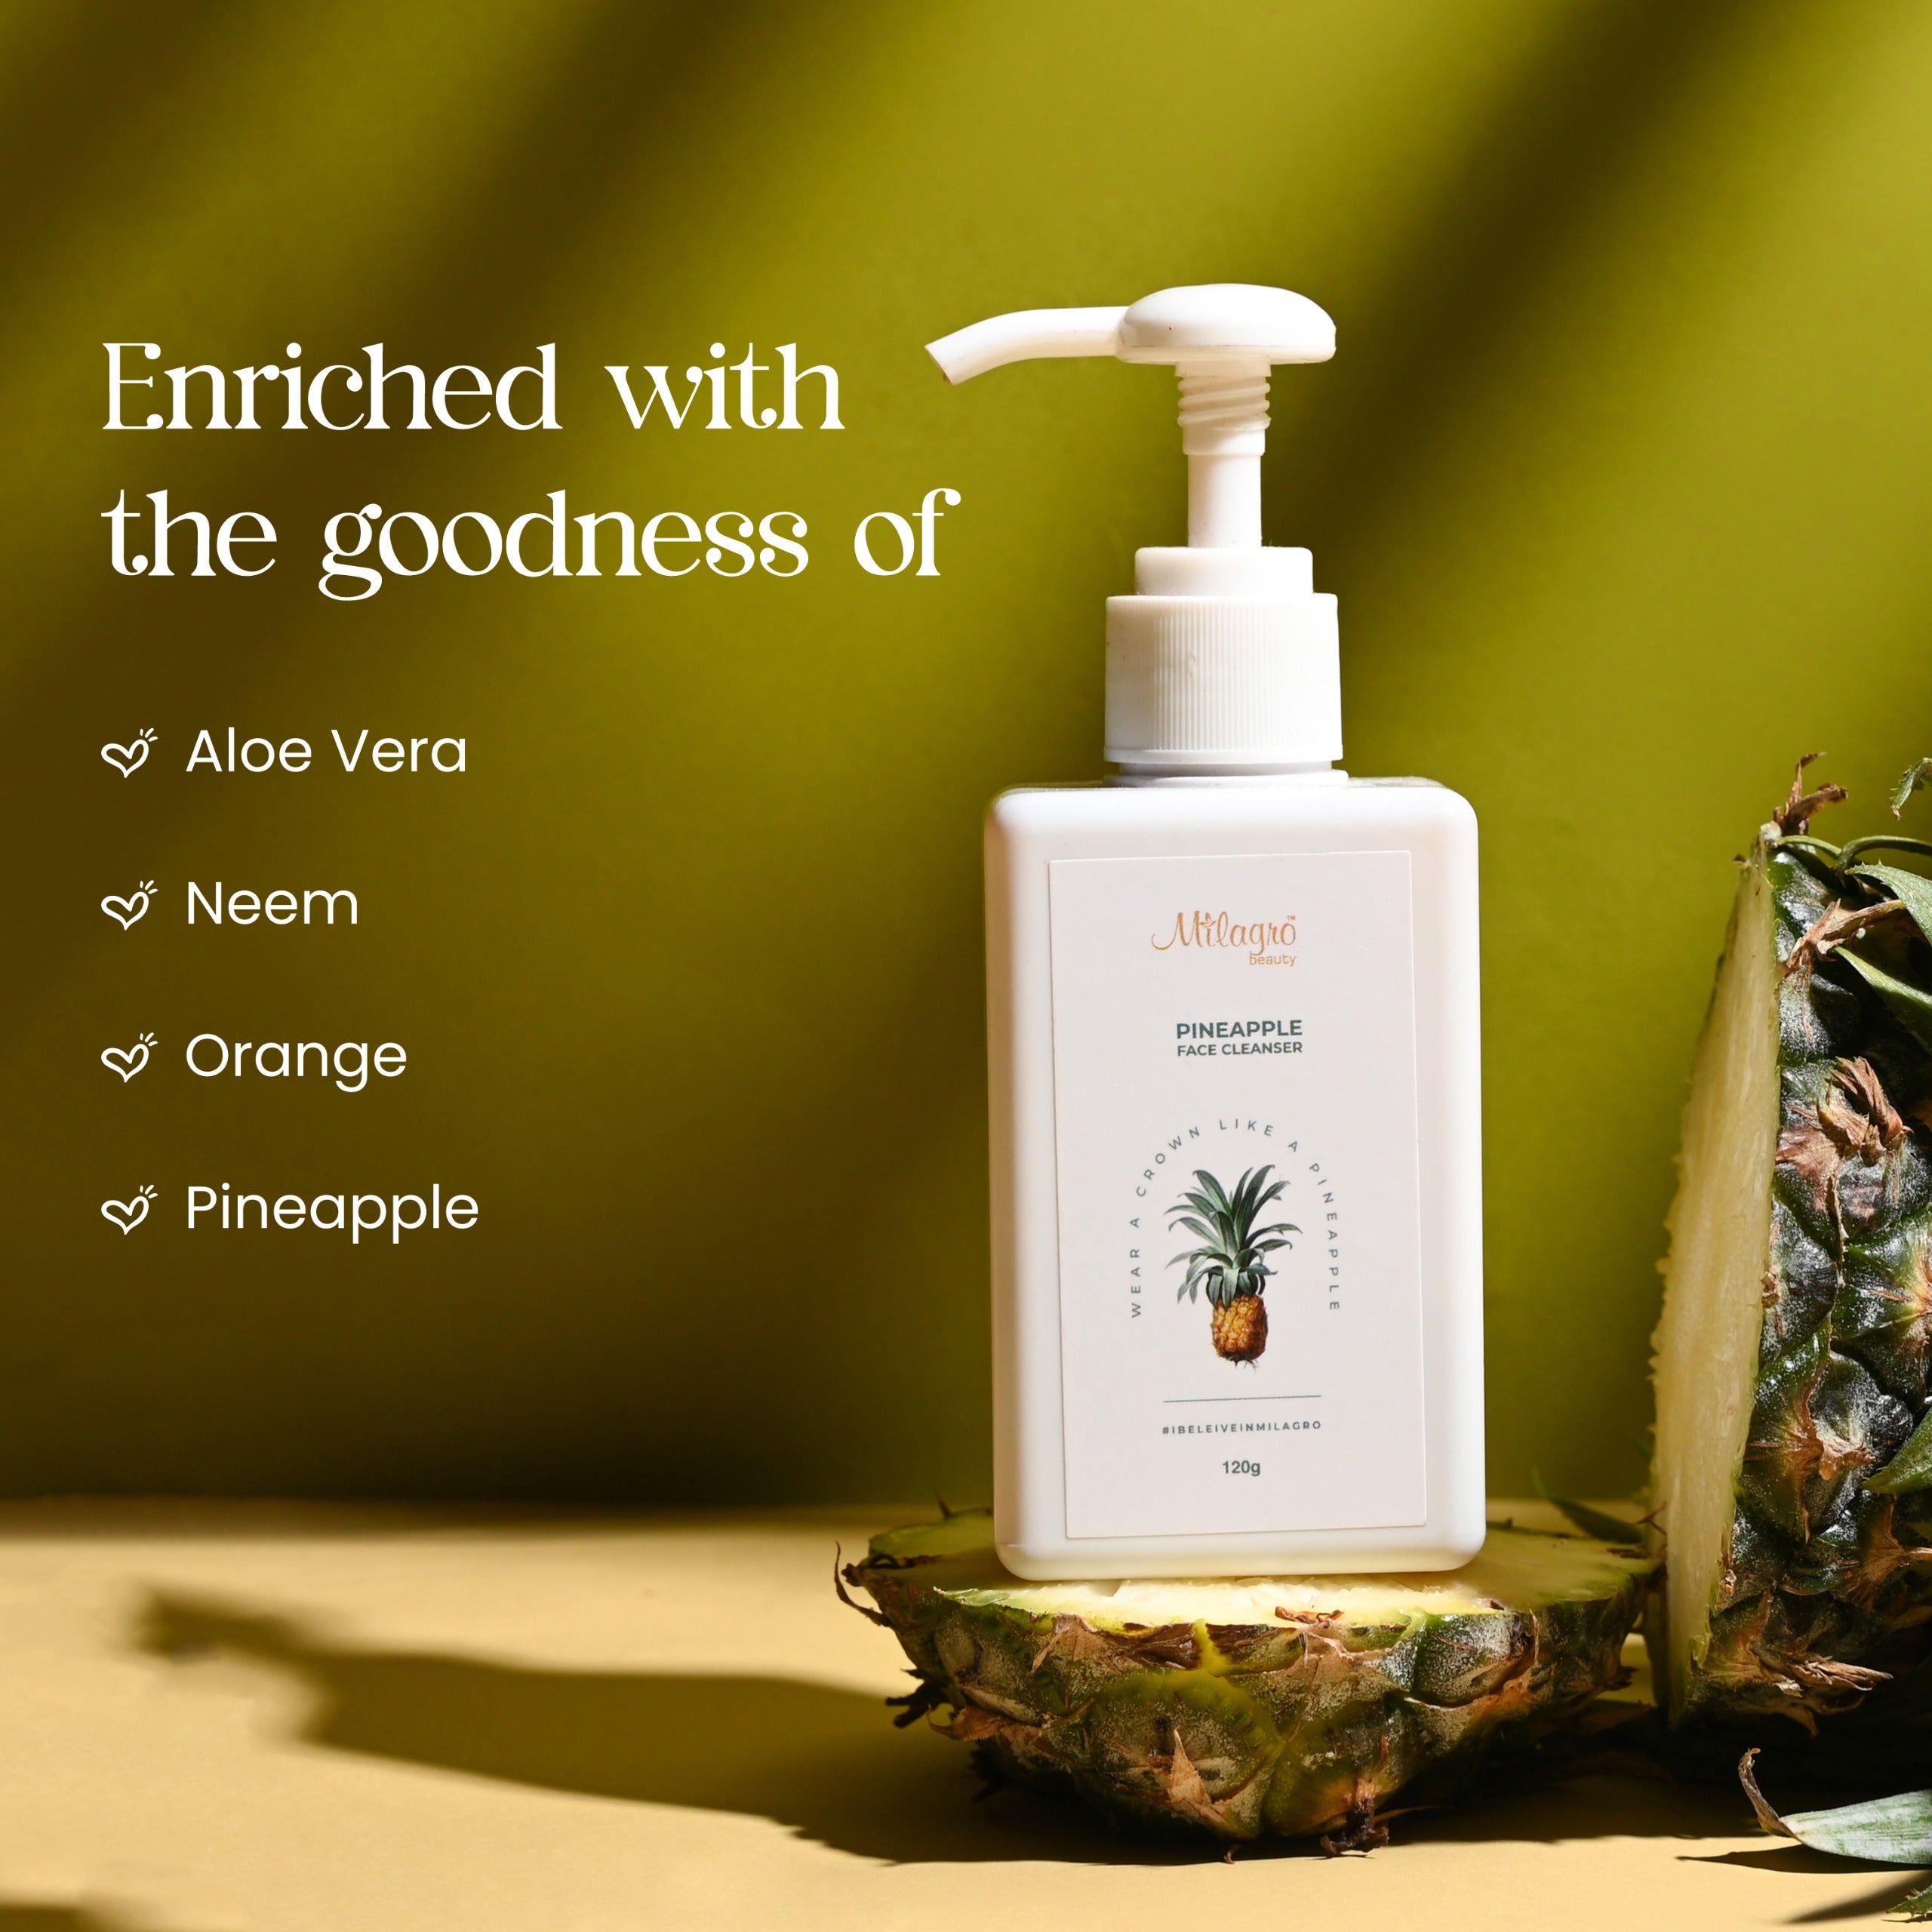 Pineapple Face Cleanser